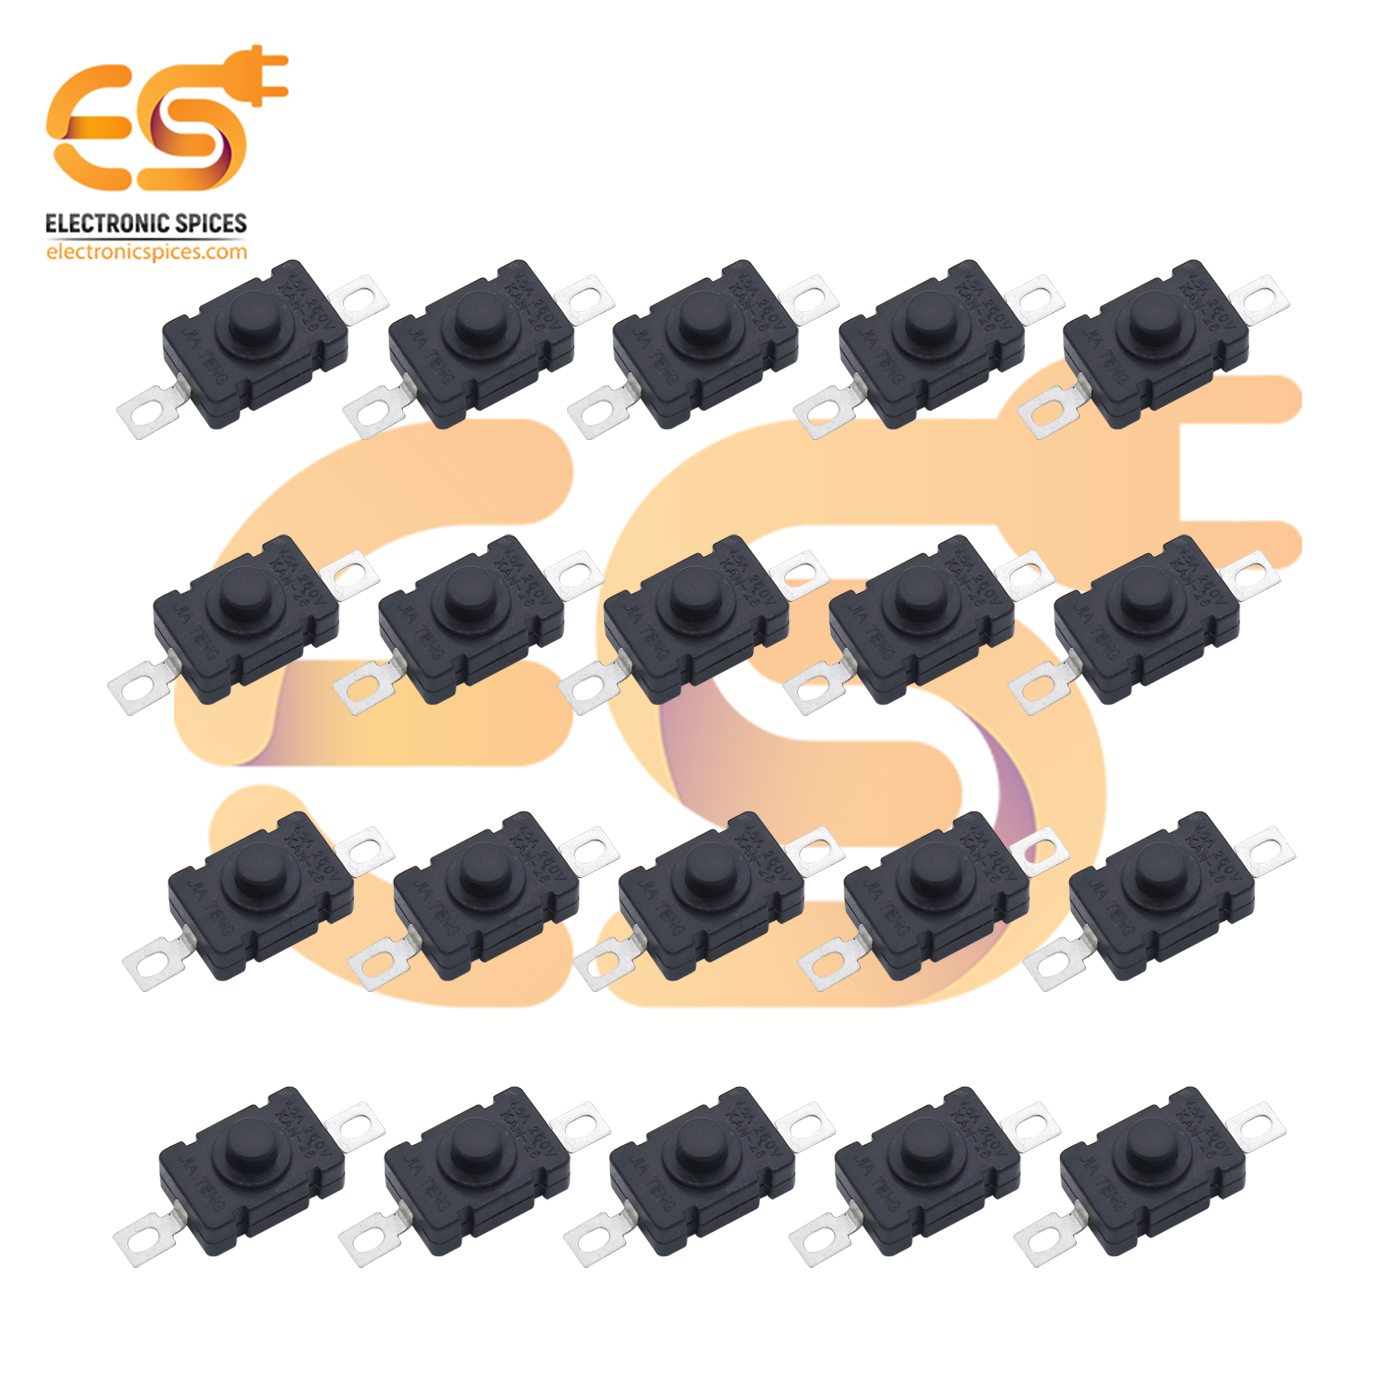 Black color KAN-28 8mm metal plates 1A 30V SPST self locking tactile switches